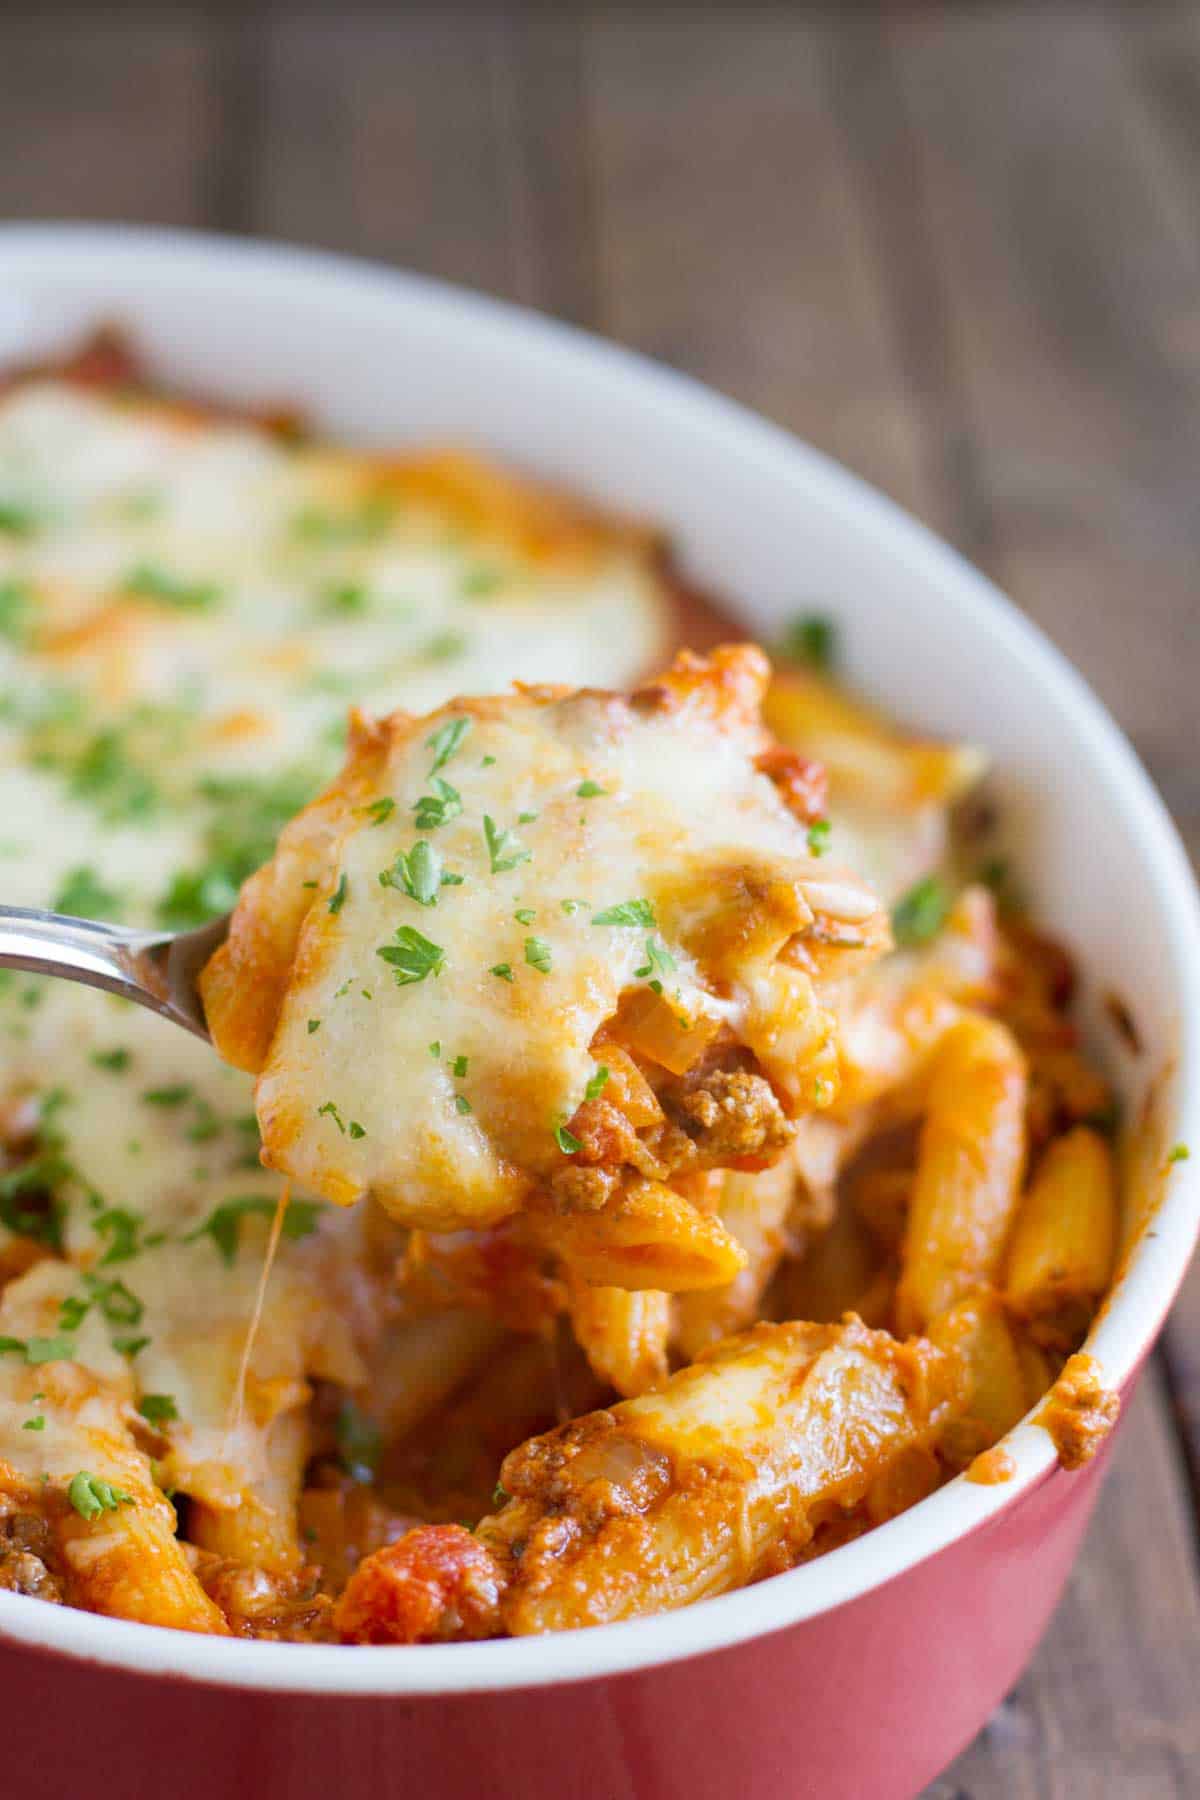 Baked Pasta With Ground Beef And Broccoli - Beef Poster